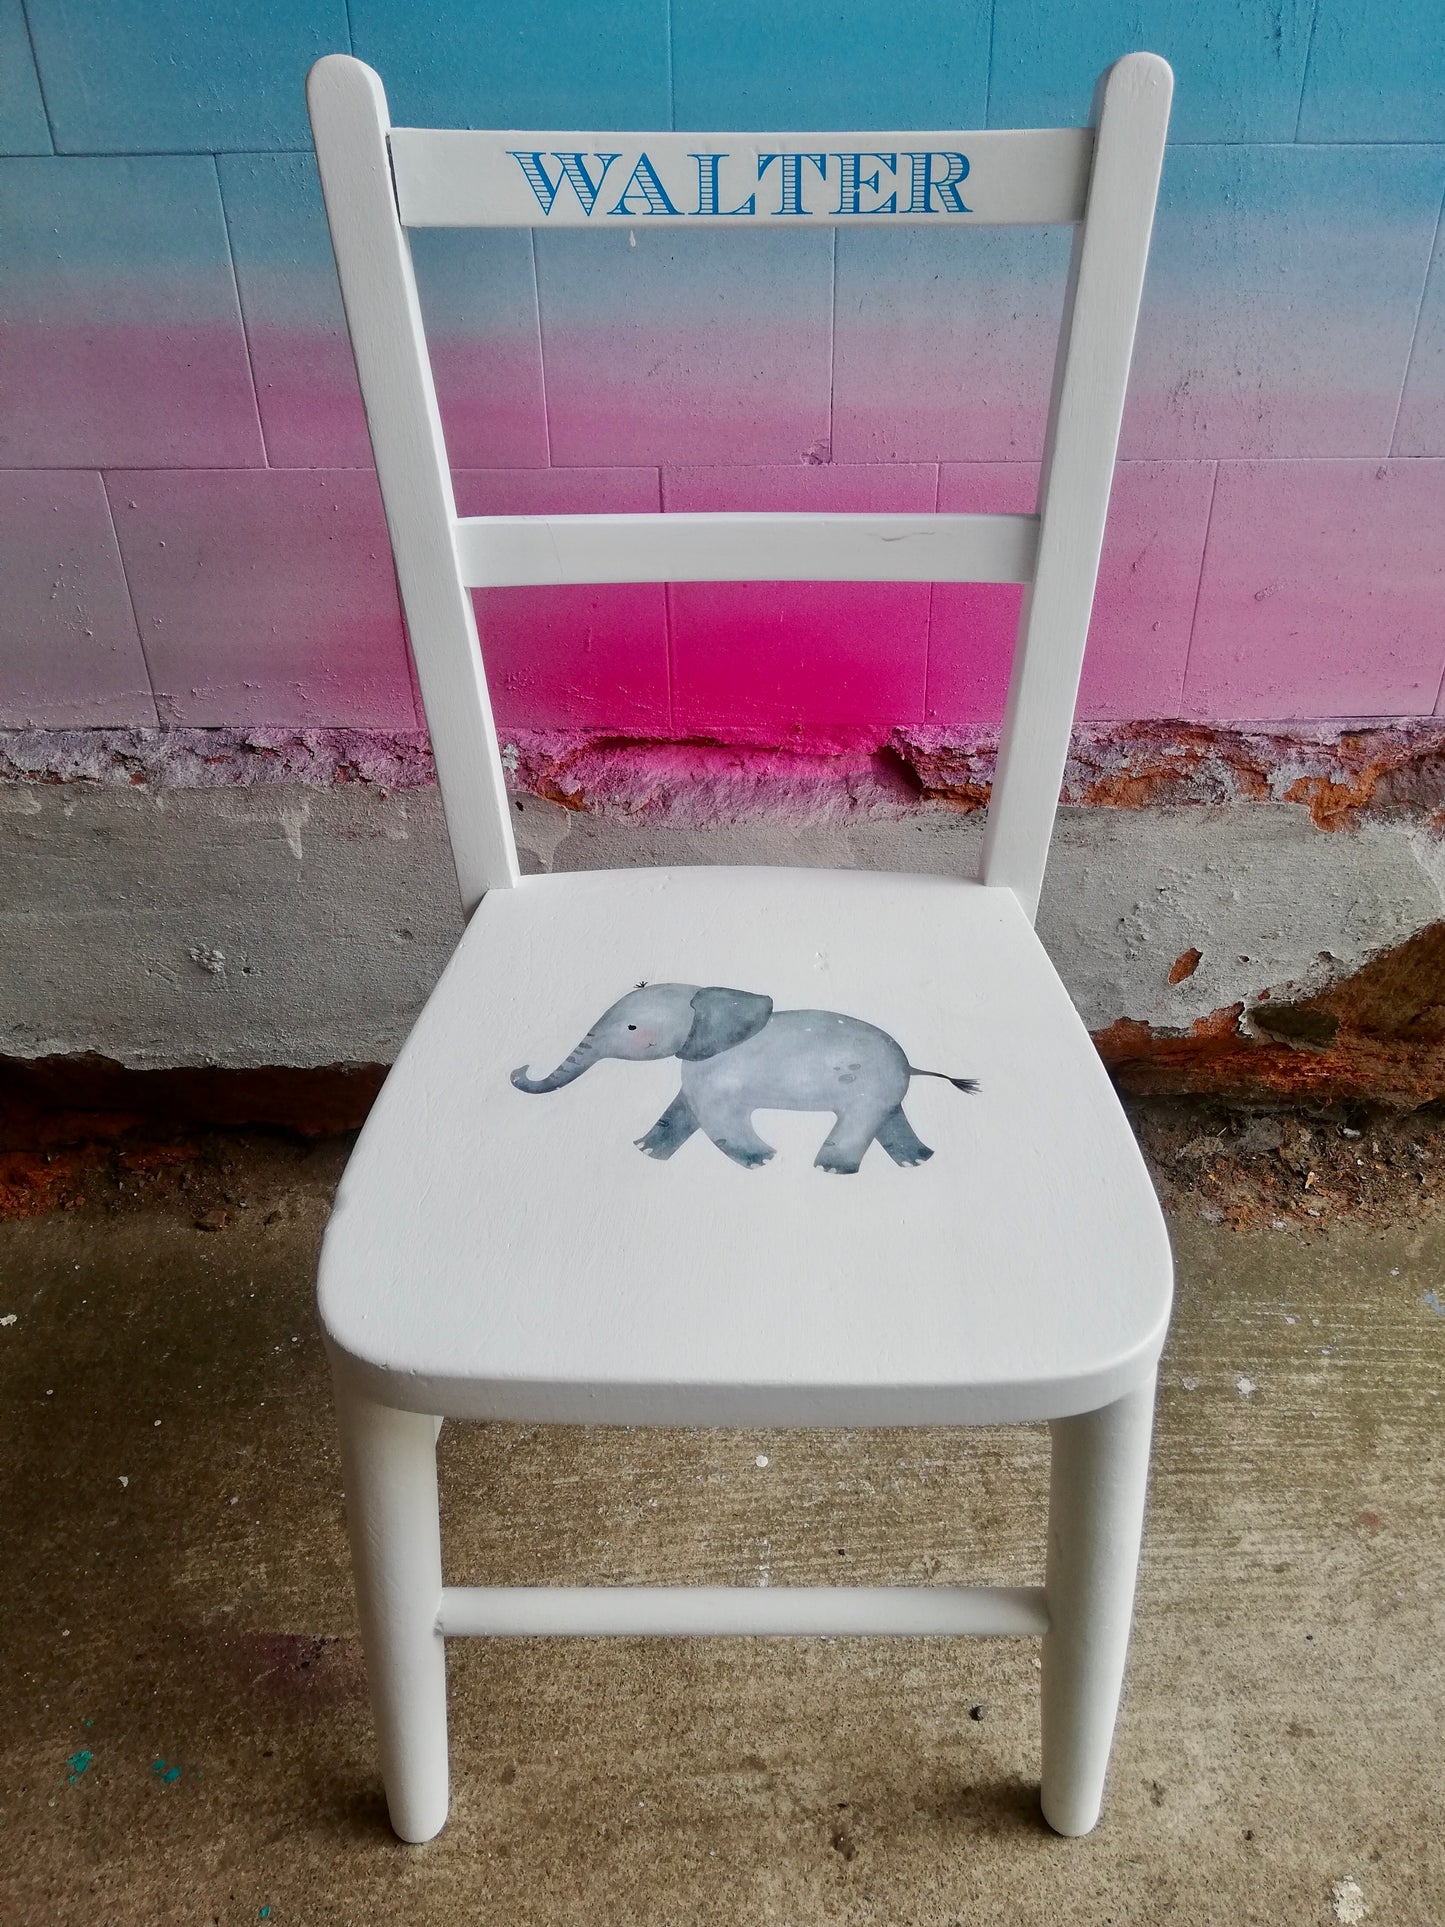 Children's personalised wooden nursery school chair with elephant theme and your child's name